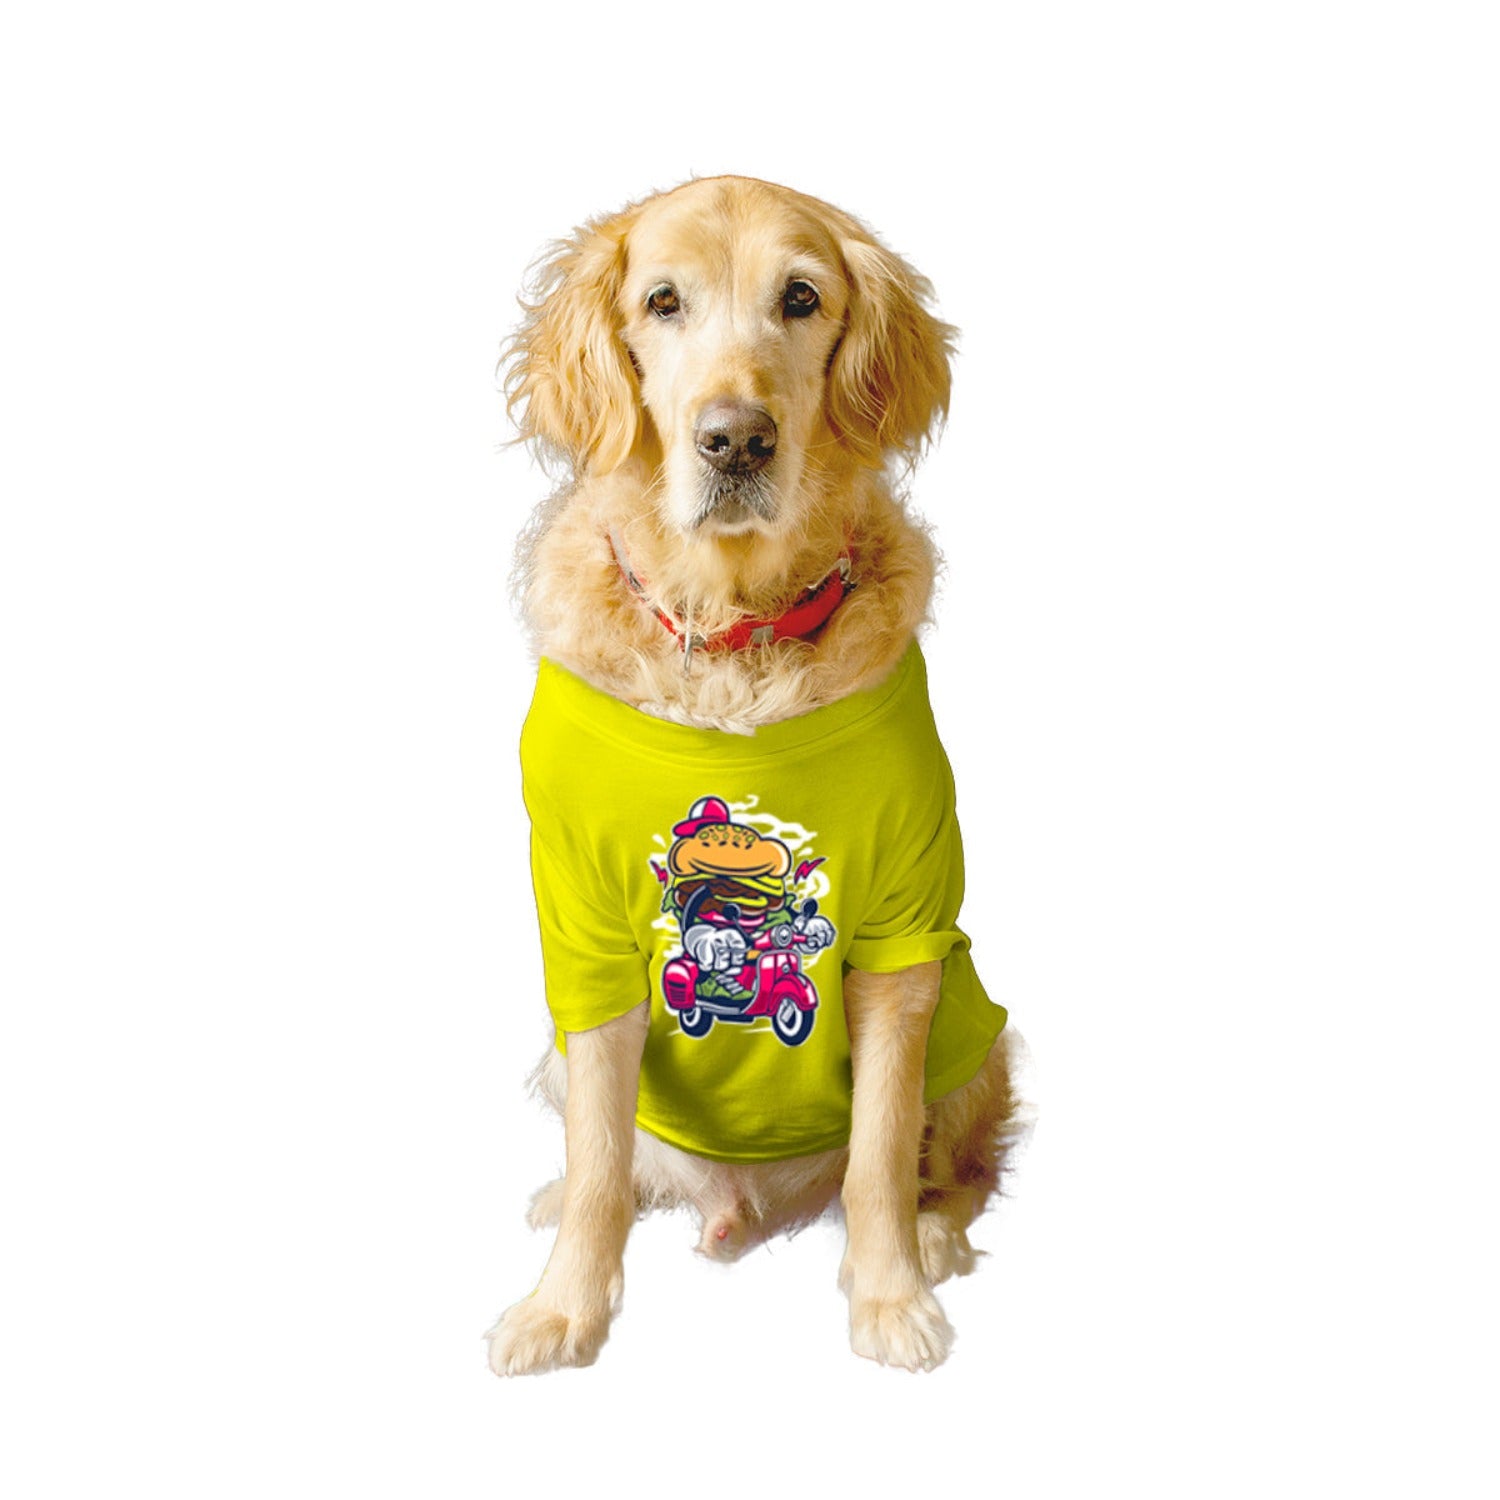 Ruse XX-Small (Chihuahuas, Papillons) / Yellow Ruse Basic Crew Neck "Burger Scooter" Printed Half Sleeves Dog Tee